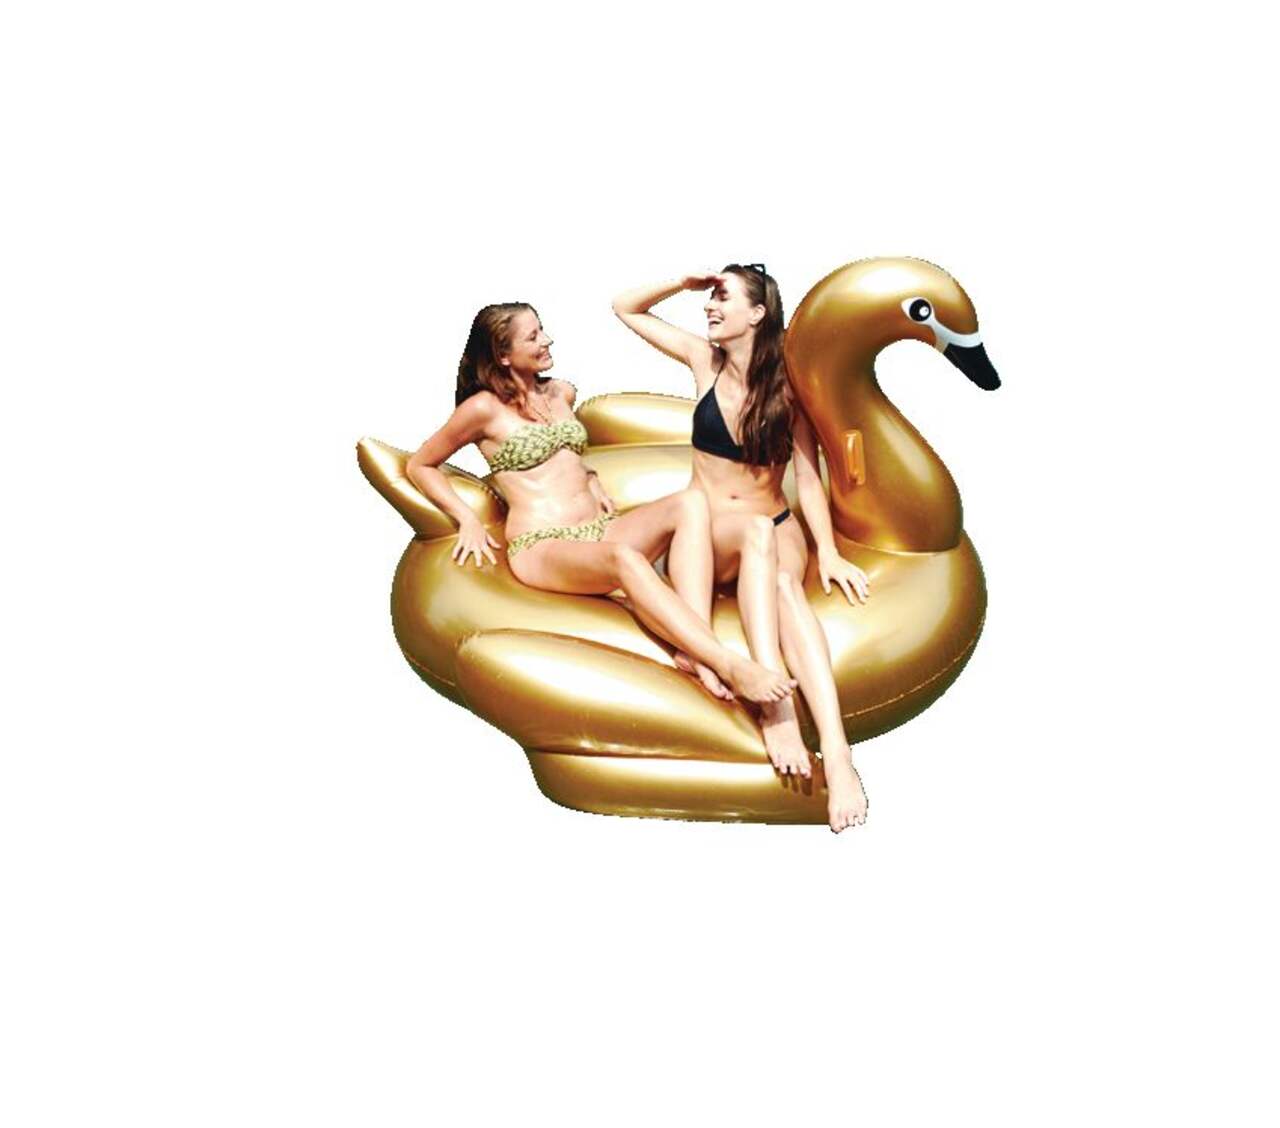 Clamshell Ride-On Lake Inflatable Float/Lounger